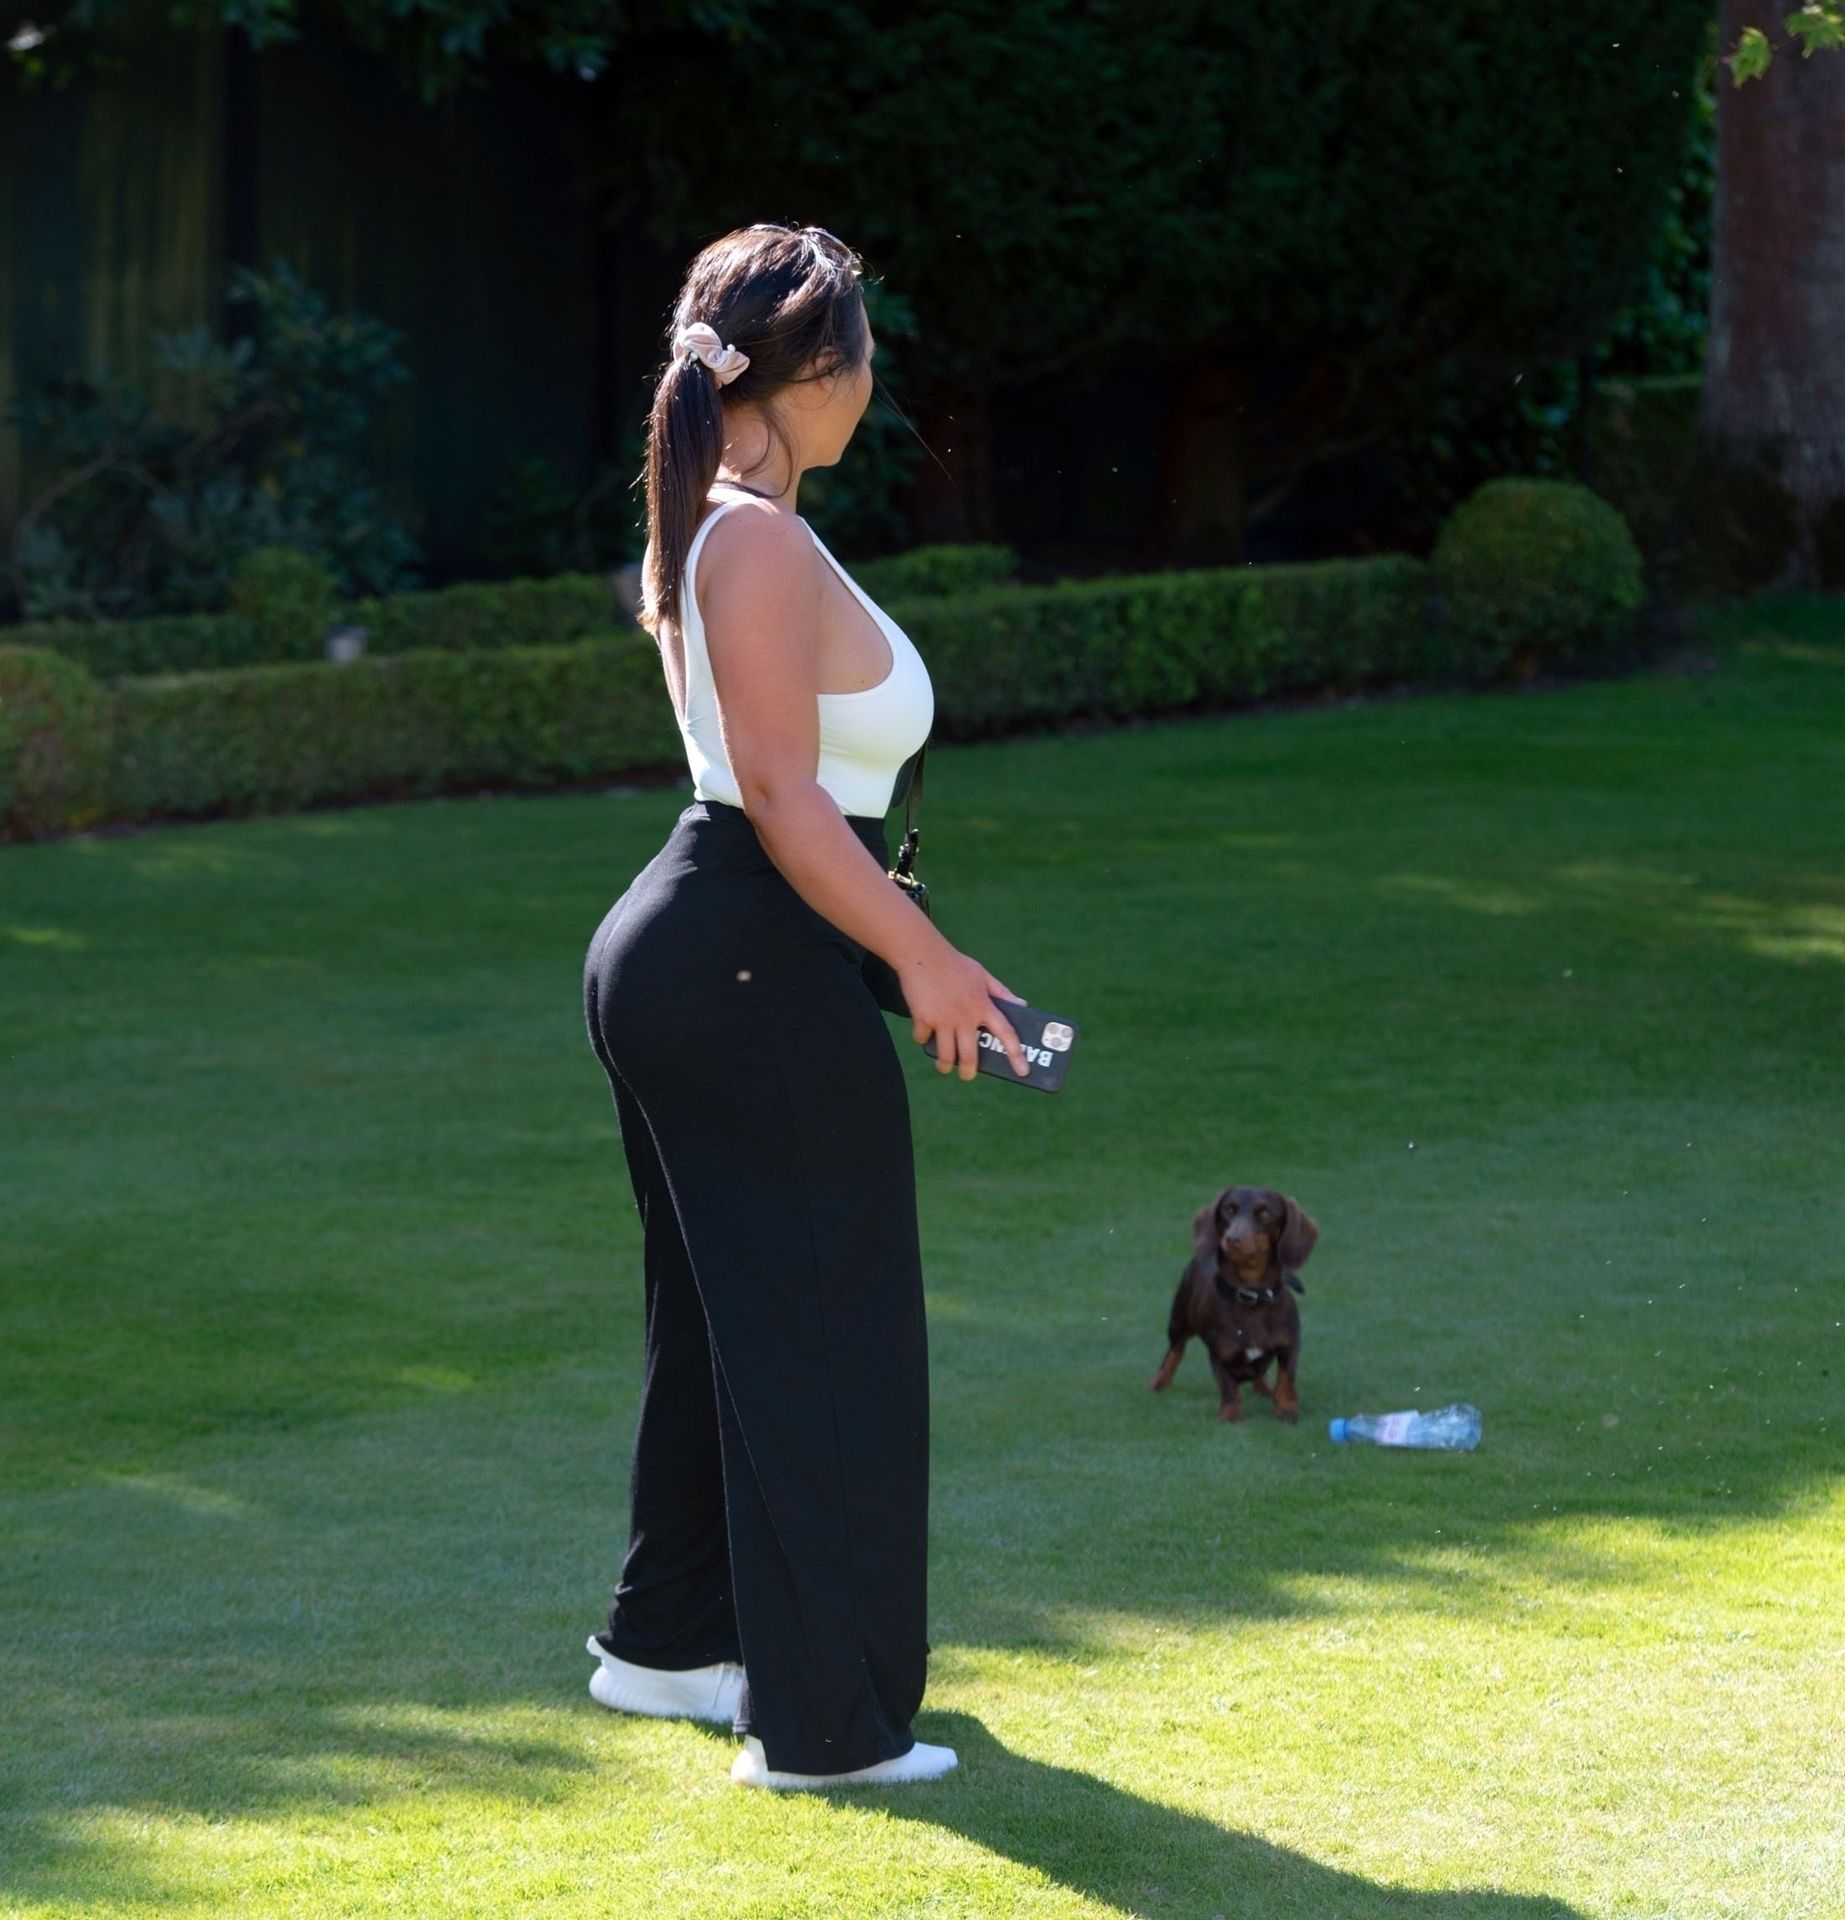 Lauren Goodger Shows Off Her Curves In A Park In Essex 8 Photos Thefappening